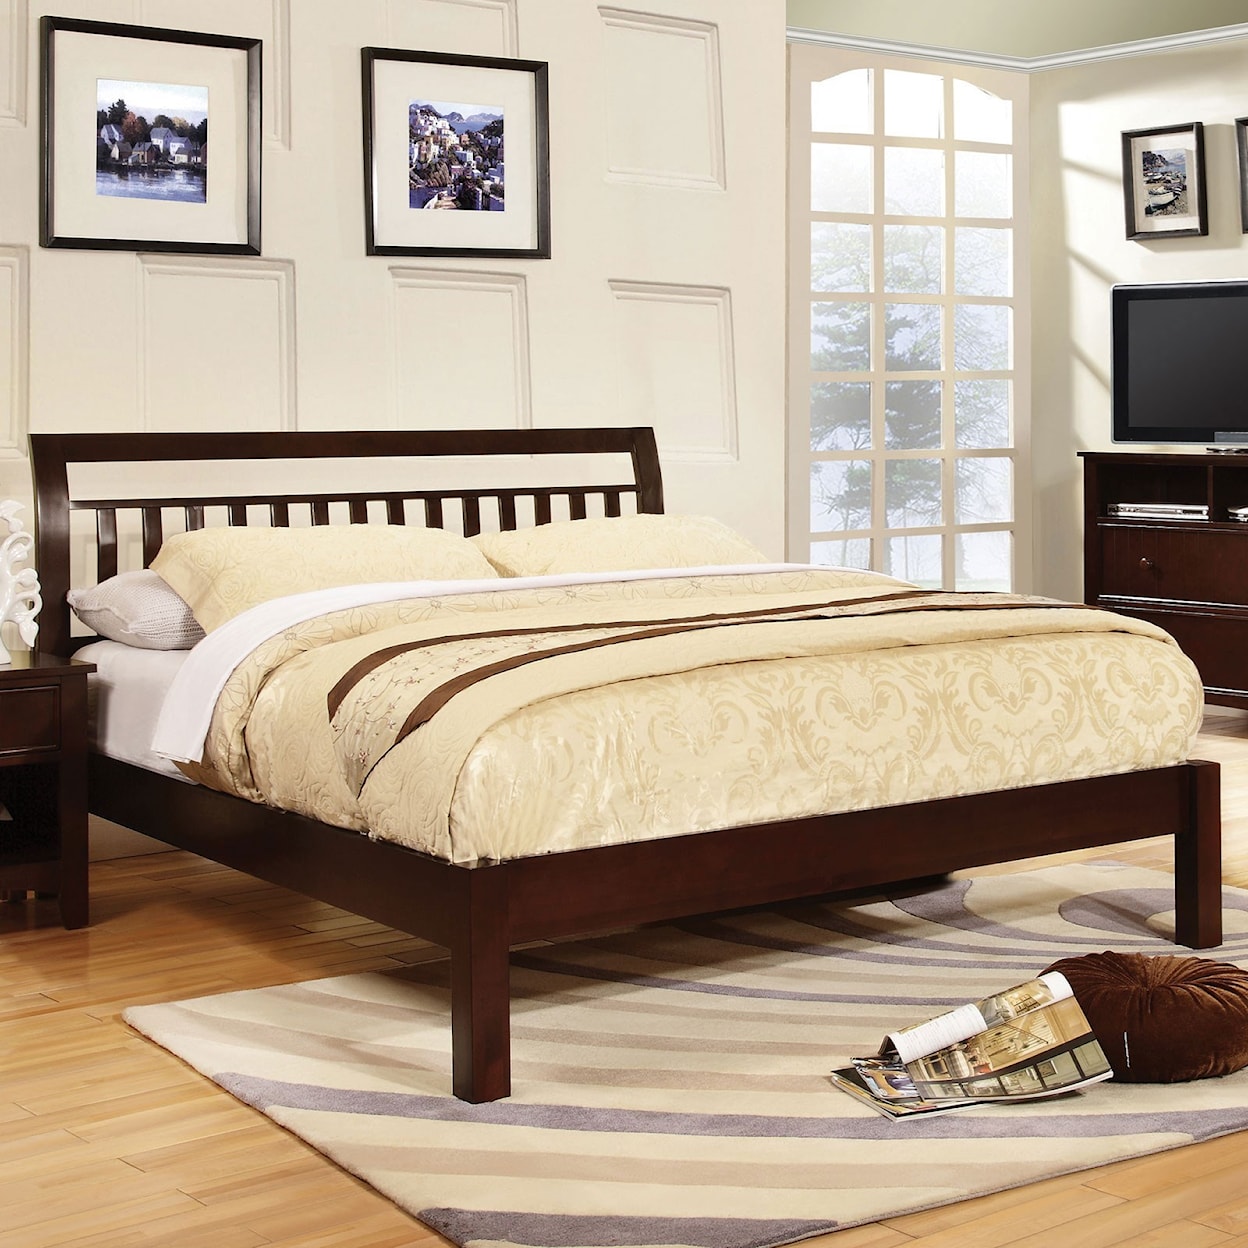 Furniture of America Corry California King Sleigh Bed